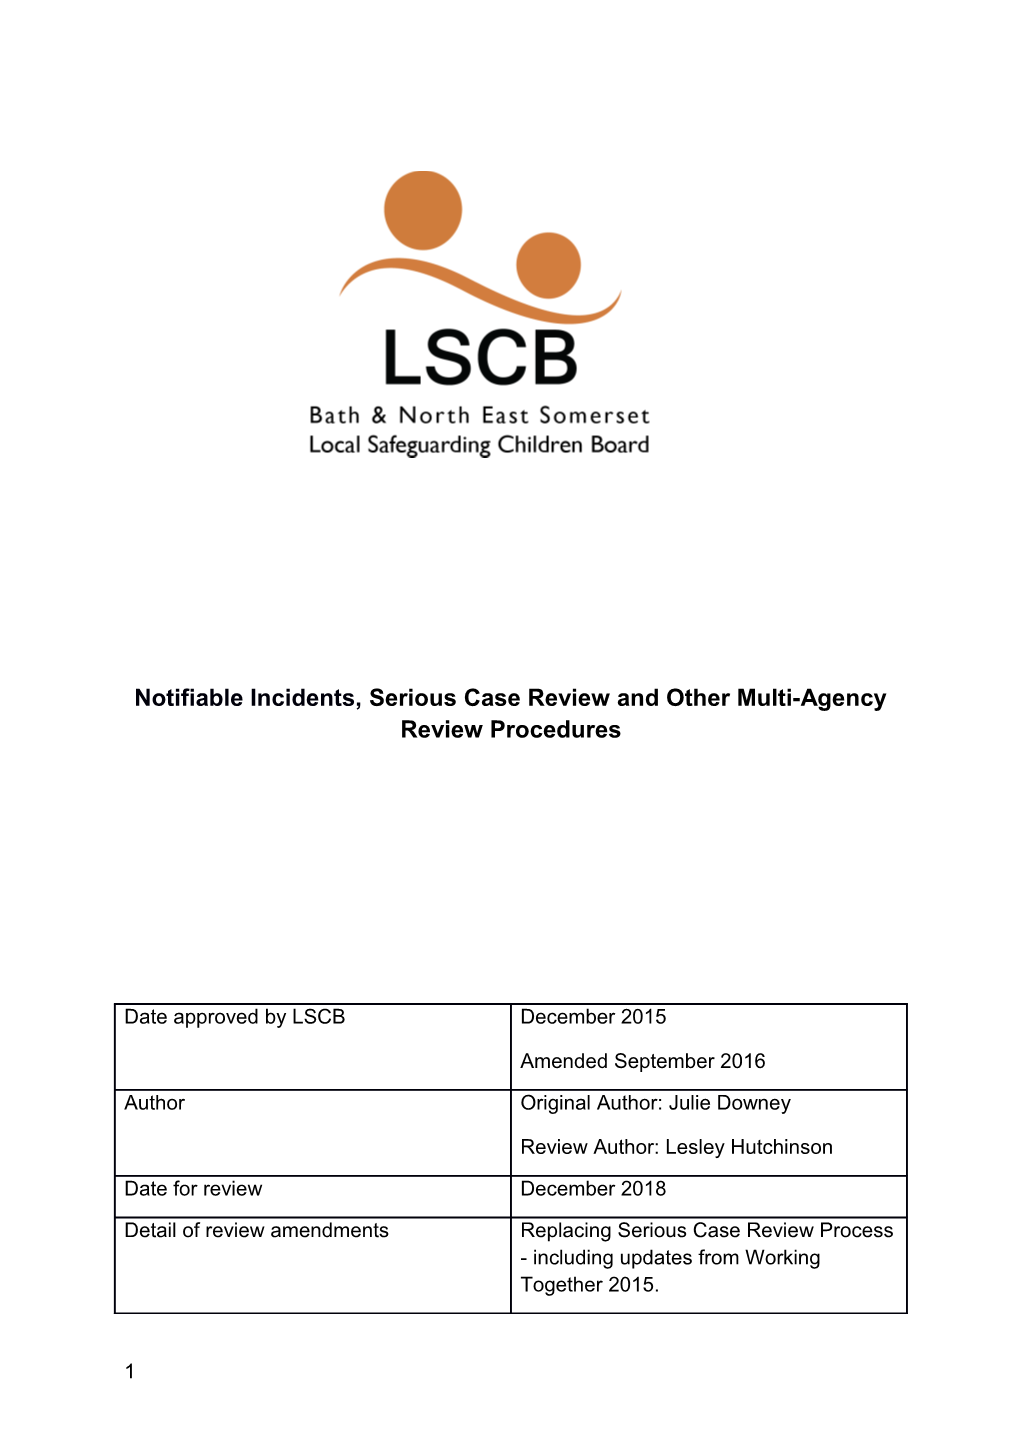 Notifiable Incidents, Serious Case Review and Other Multi-Agency Review Procedures